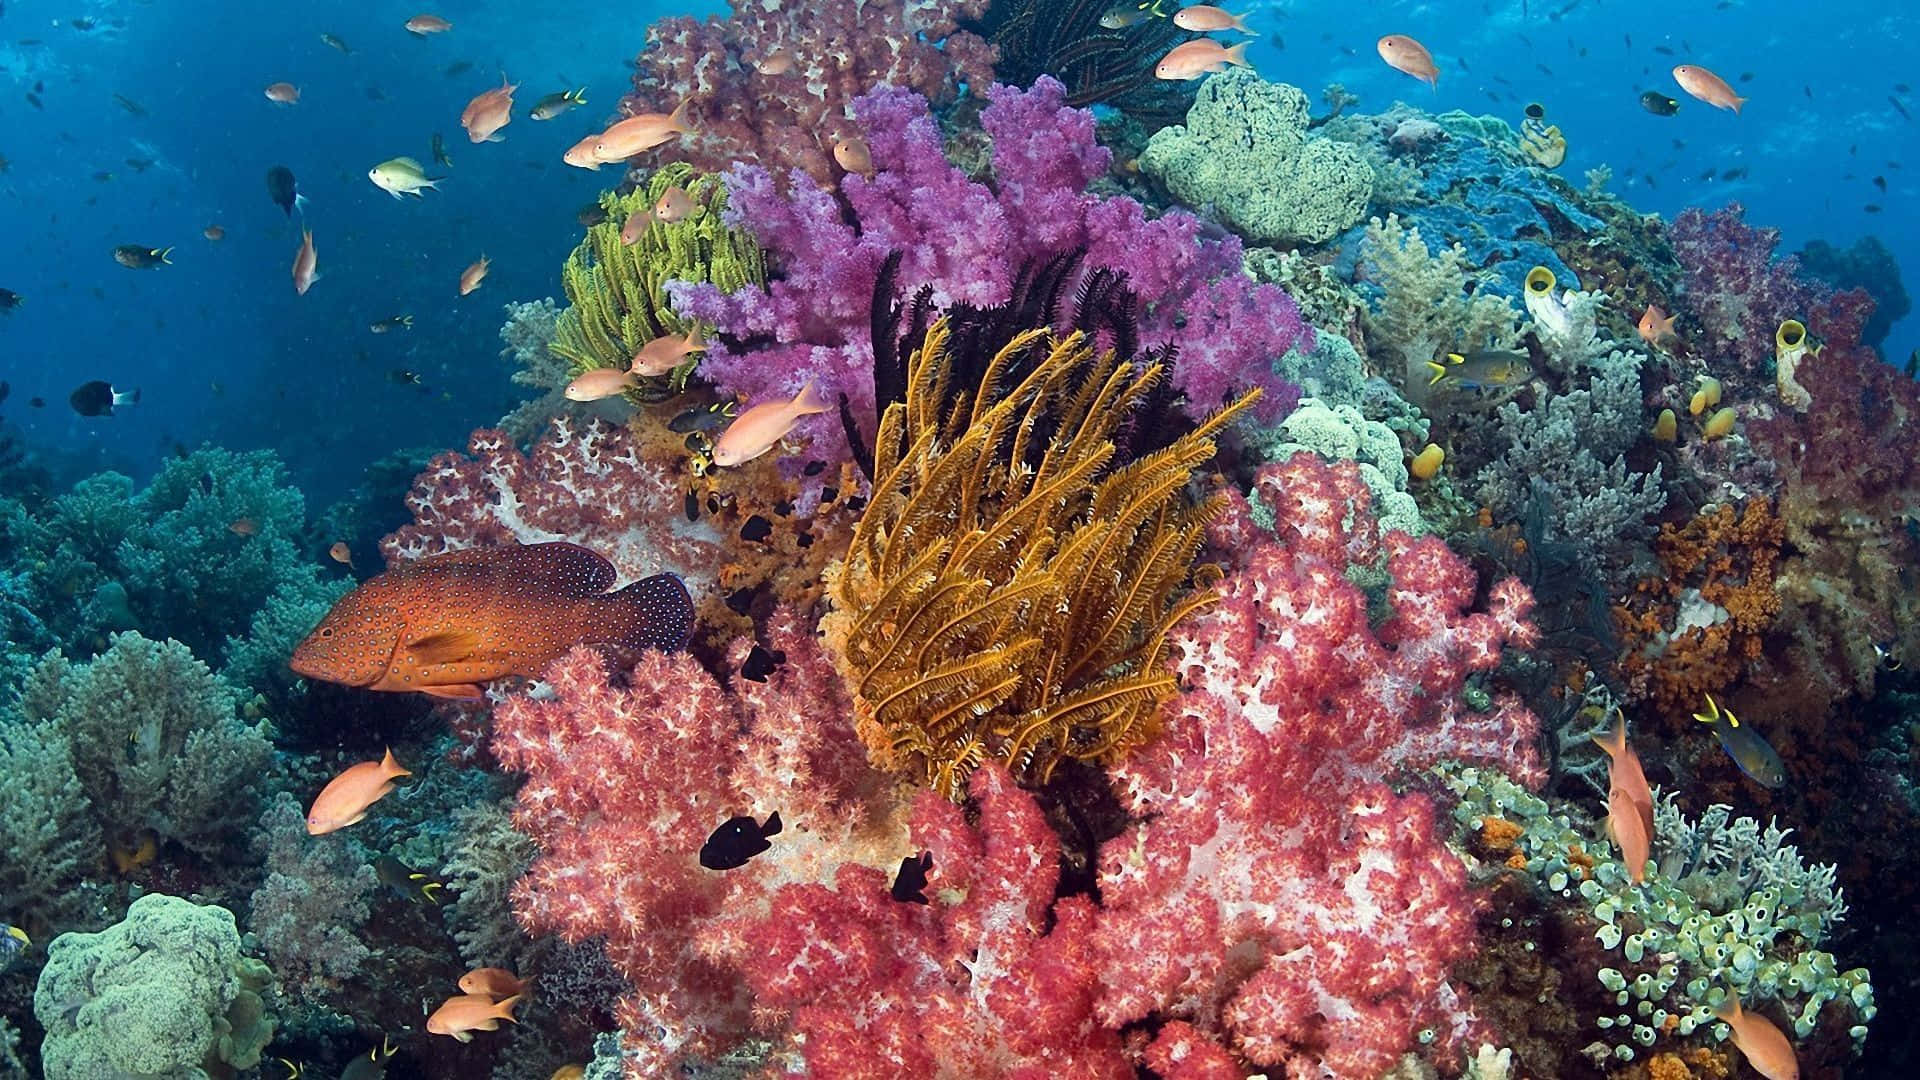 Caption: Captivating Coral Reef Display